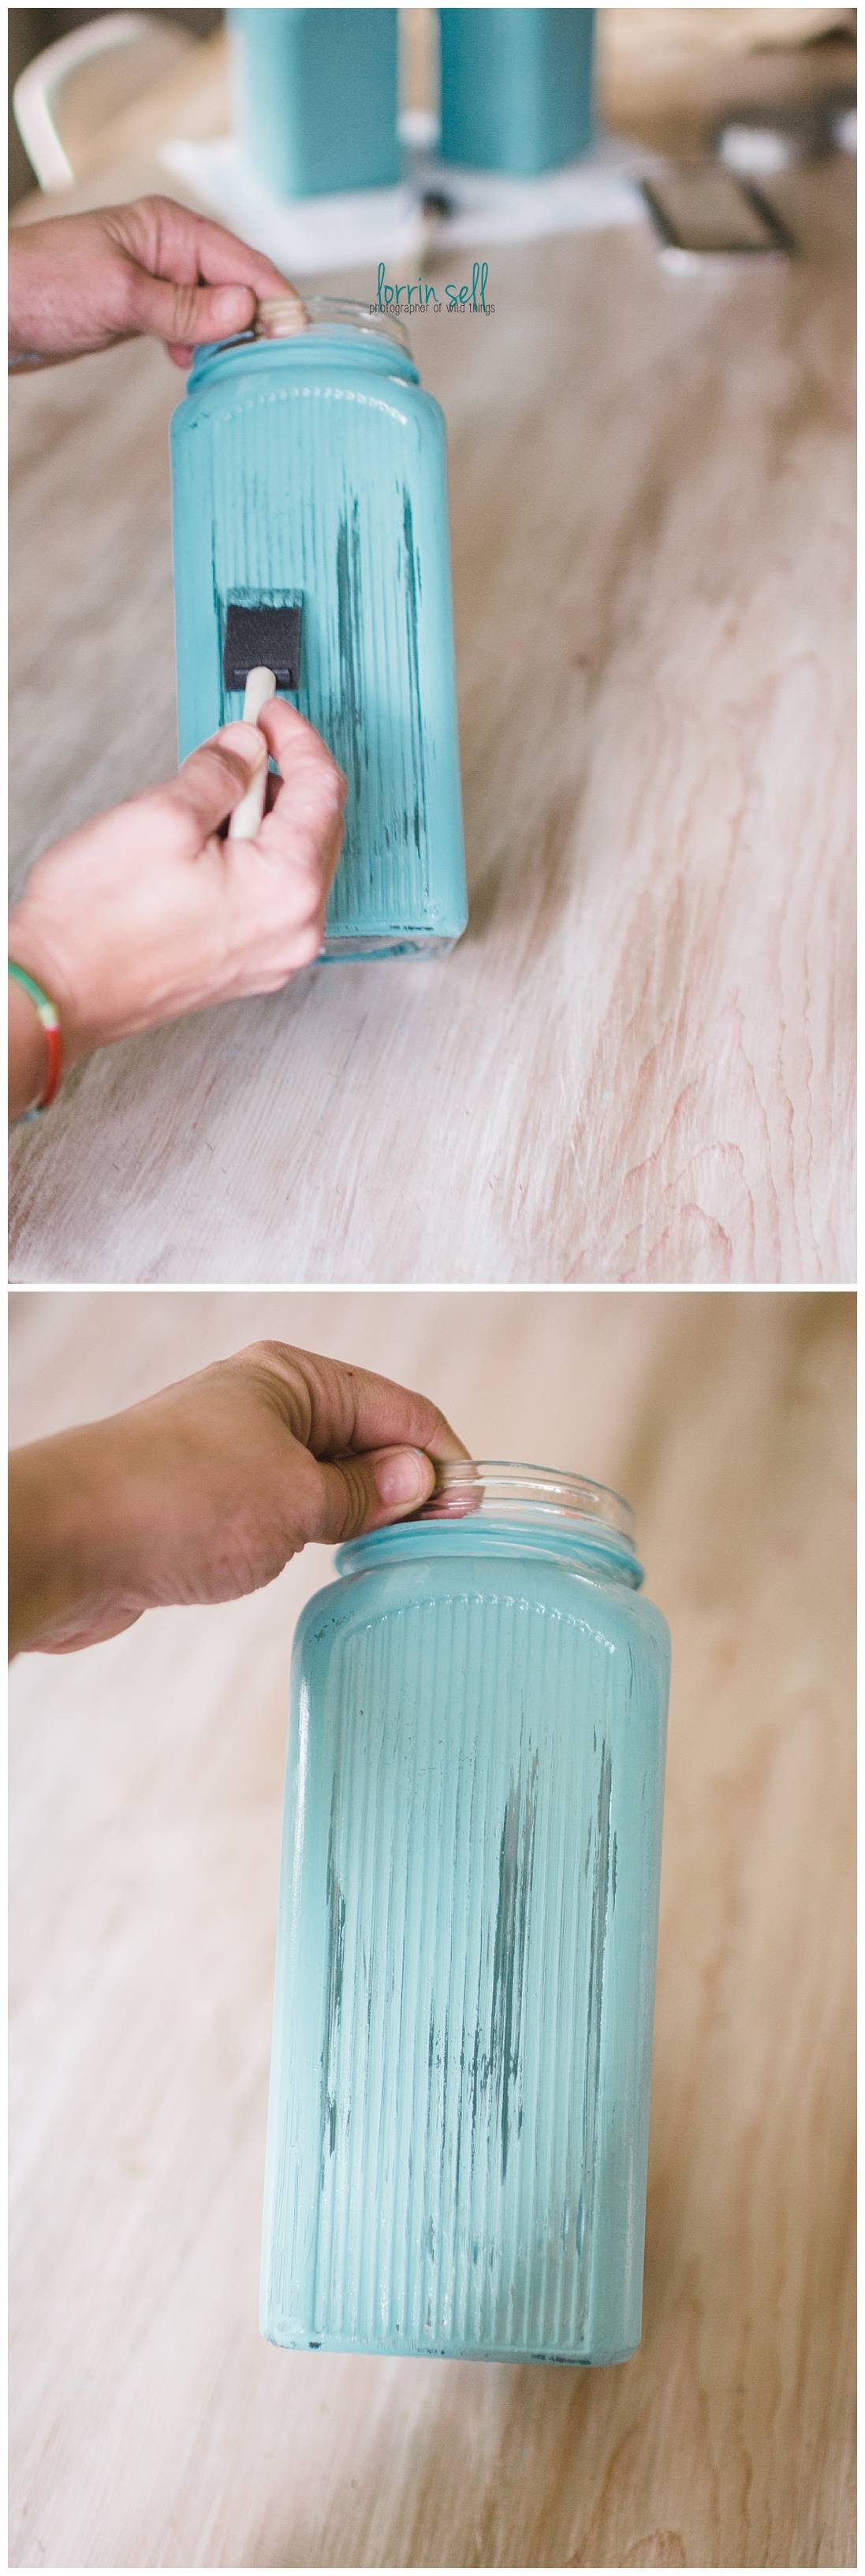 I am in love with these DIY painted kitchen canisters, and they were so easy, and fun to make. It was so nice to be able to pick any color I wanted.